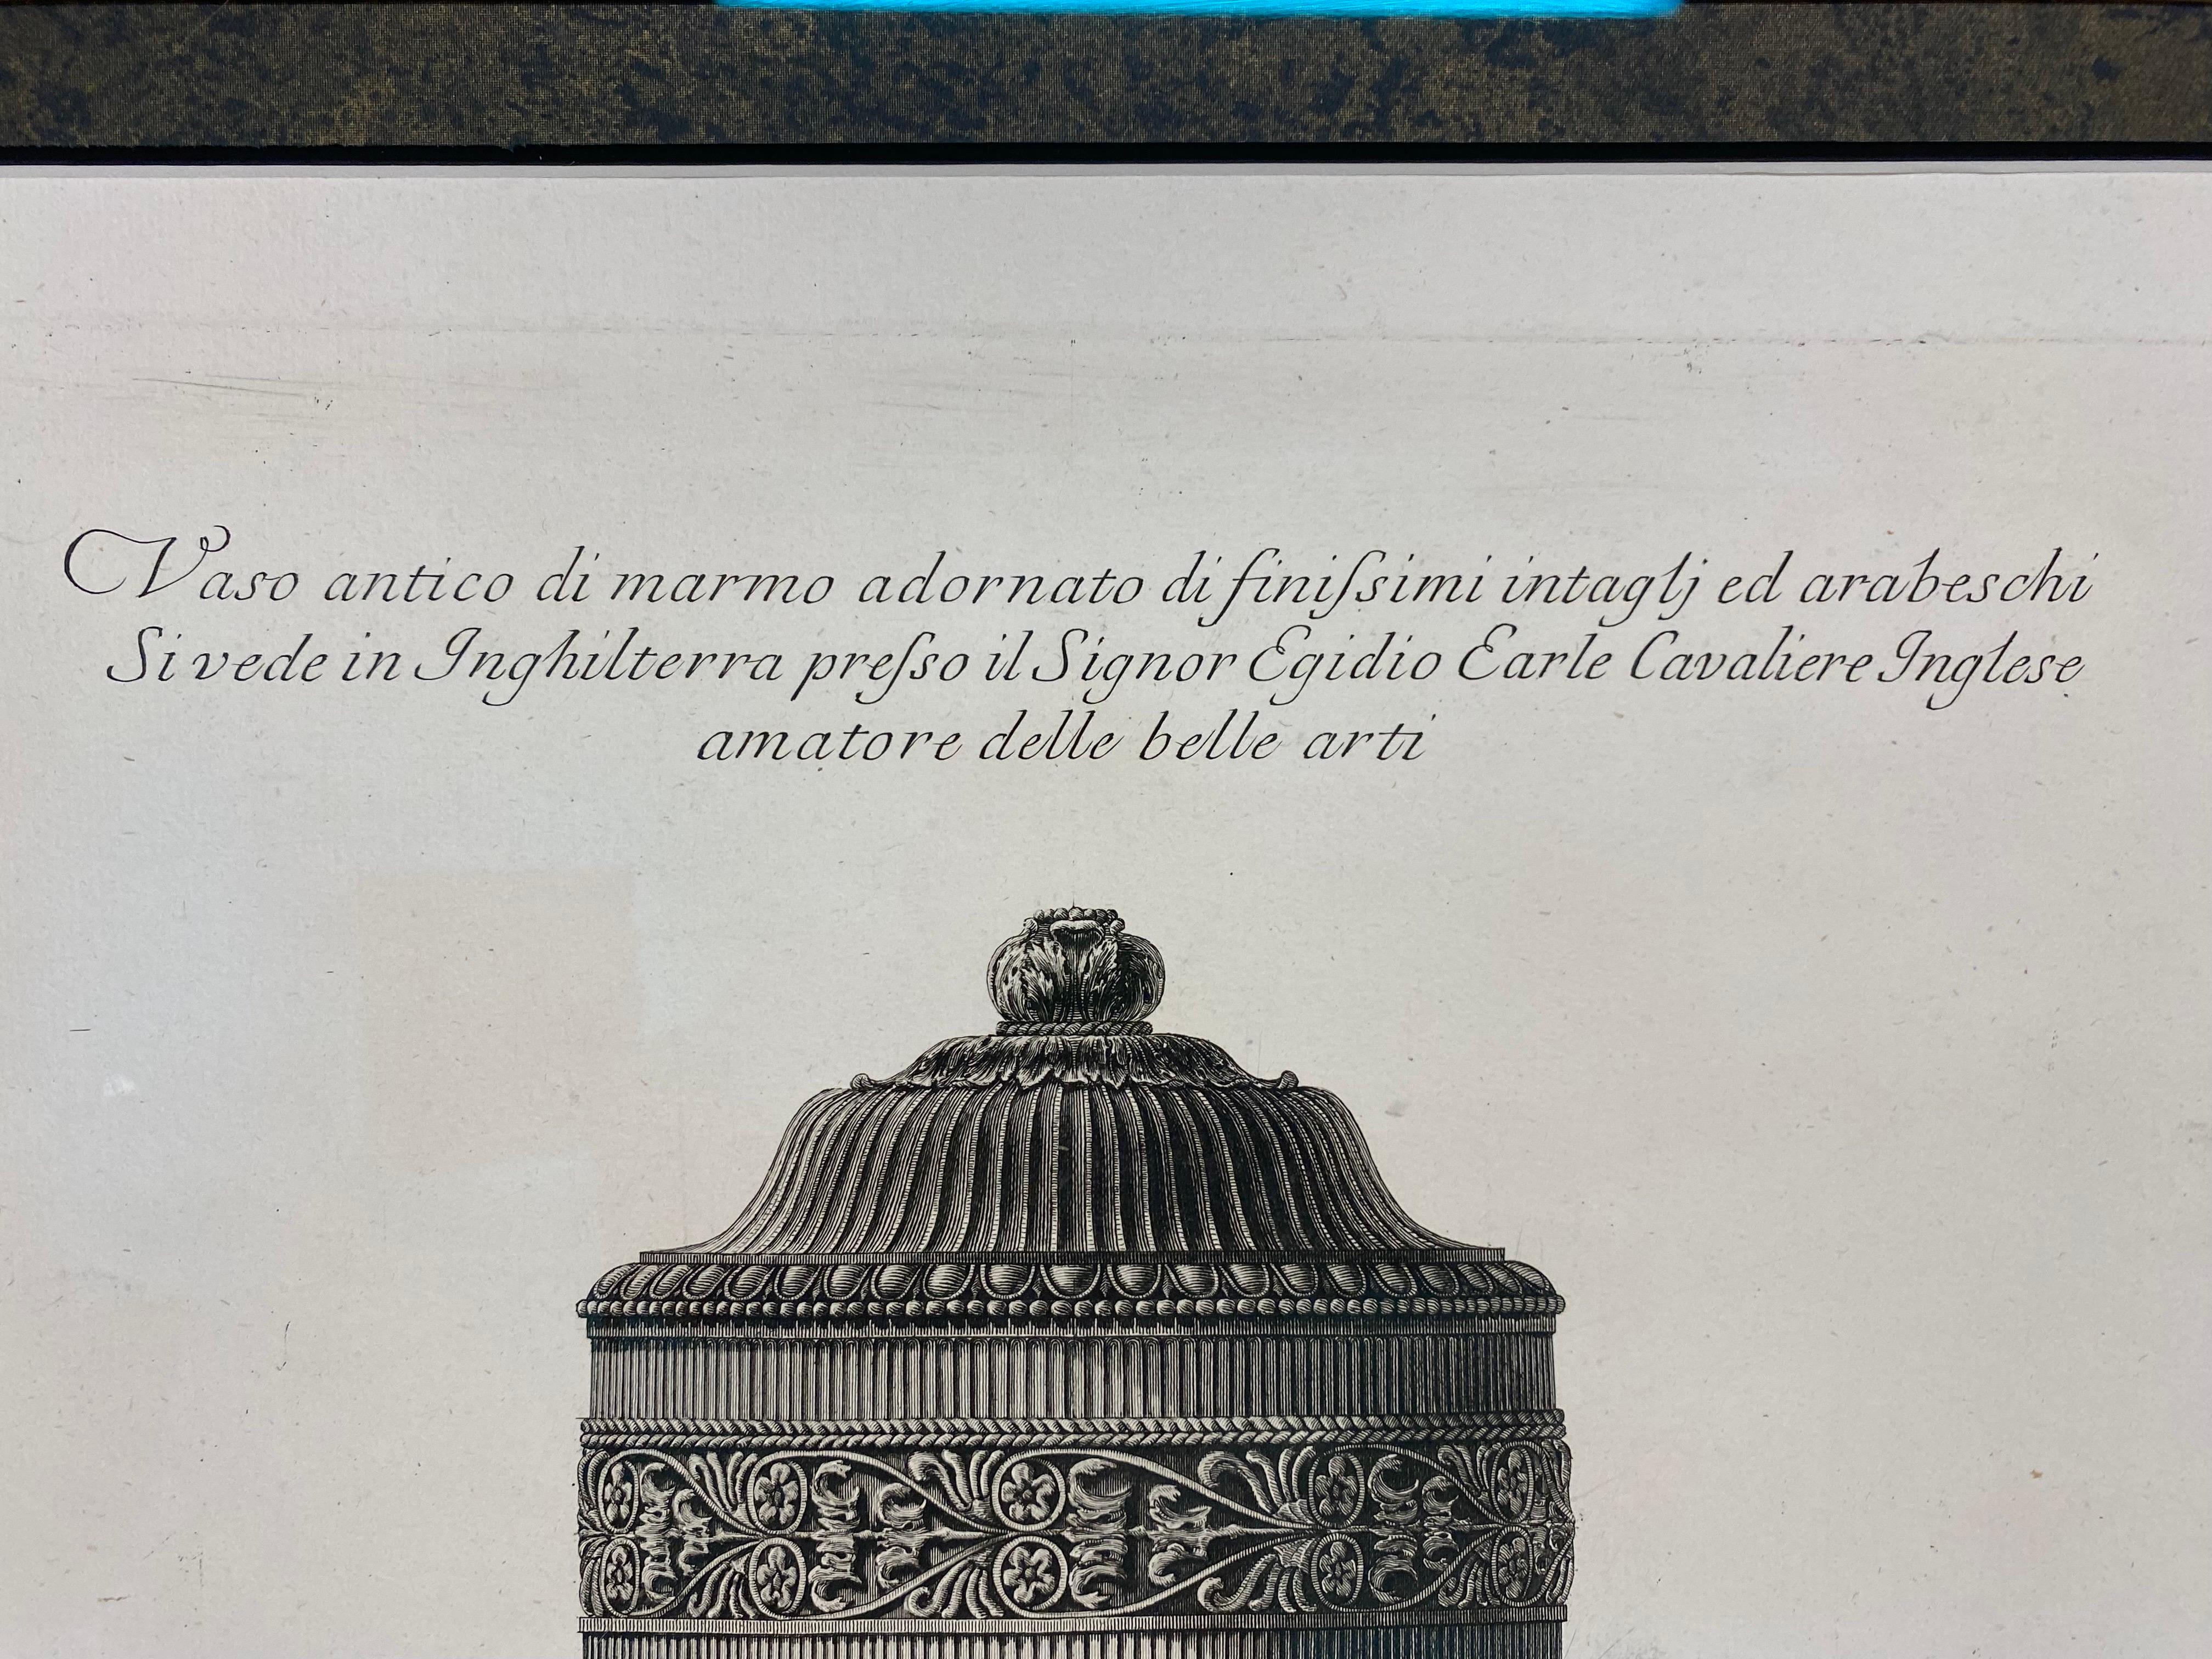 This is a Giovanni Battista piranesi copper etching. Giovanni did these copper plates in the 1770s and these prints are a restrike from Rome using those copper plates. This etching of a bronze urn is presented in a custom frame and Matt boards. The